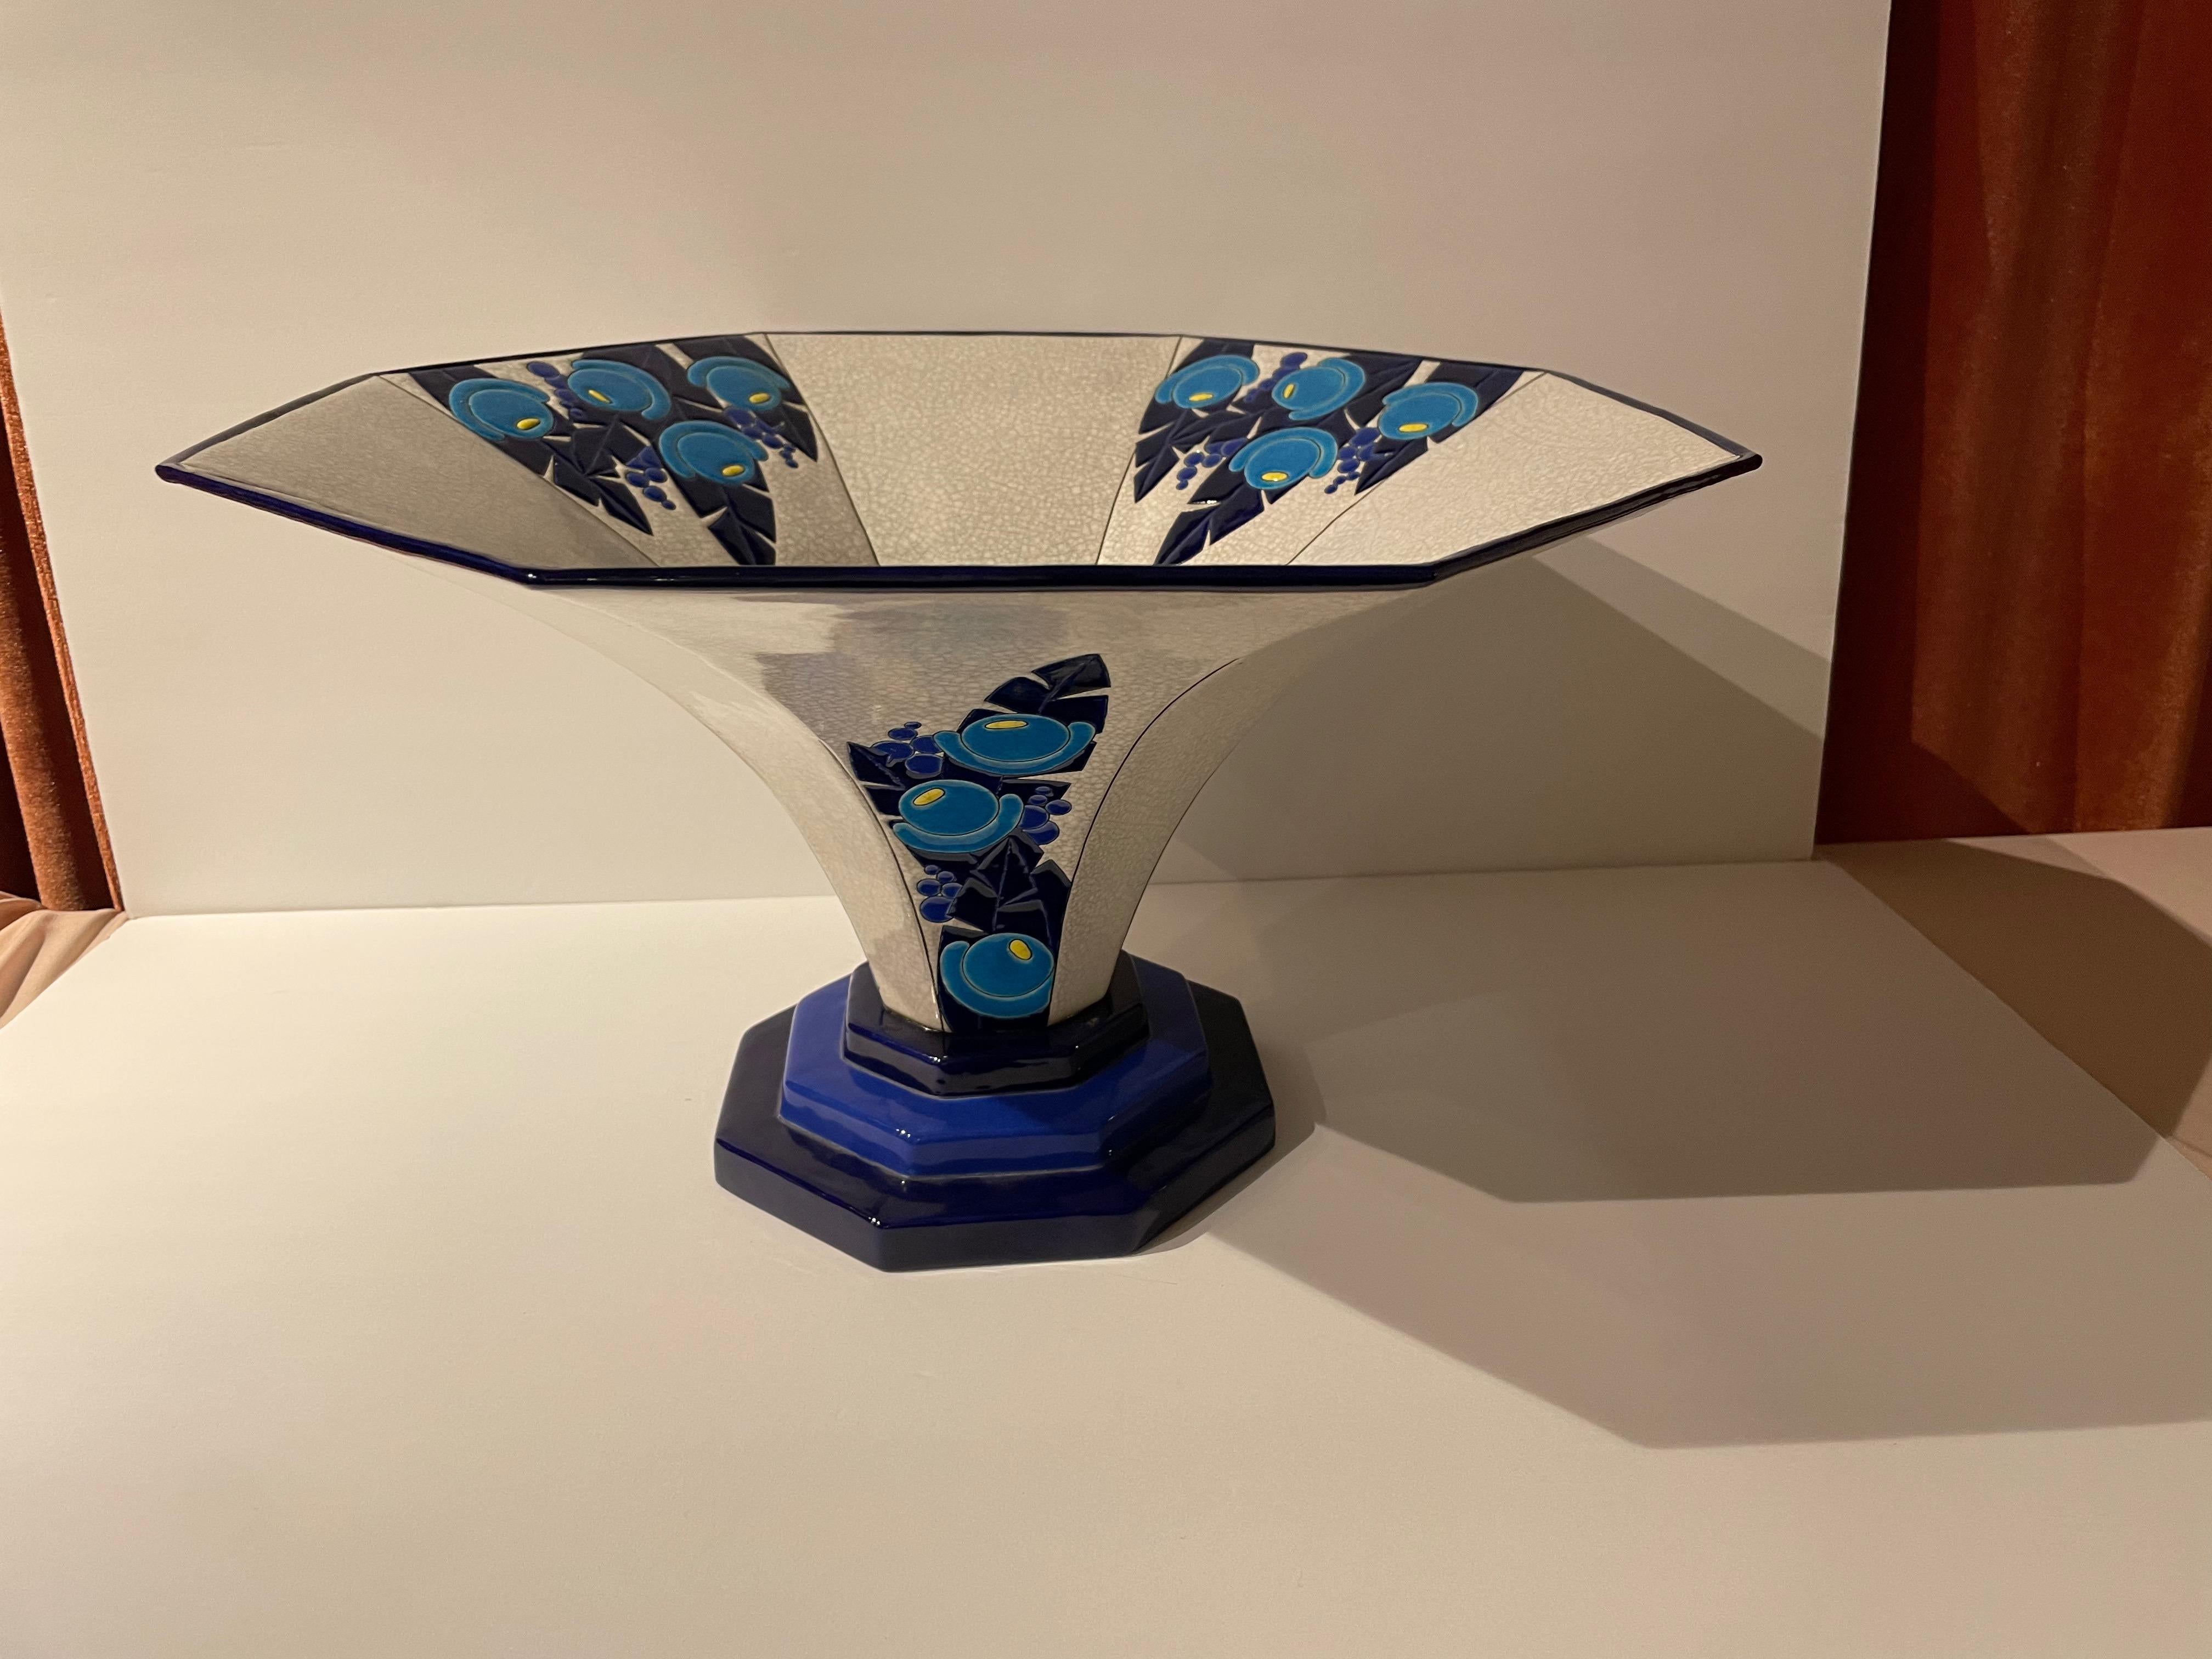 An Art Deco display or serving dish from Longwy. This piece is unusual for its large size and modernist embellishment. Using the classic colors of Longwy (the interplay of dark cobalt and light blues) but in a fresh approach with stylized tropical